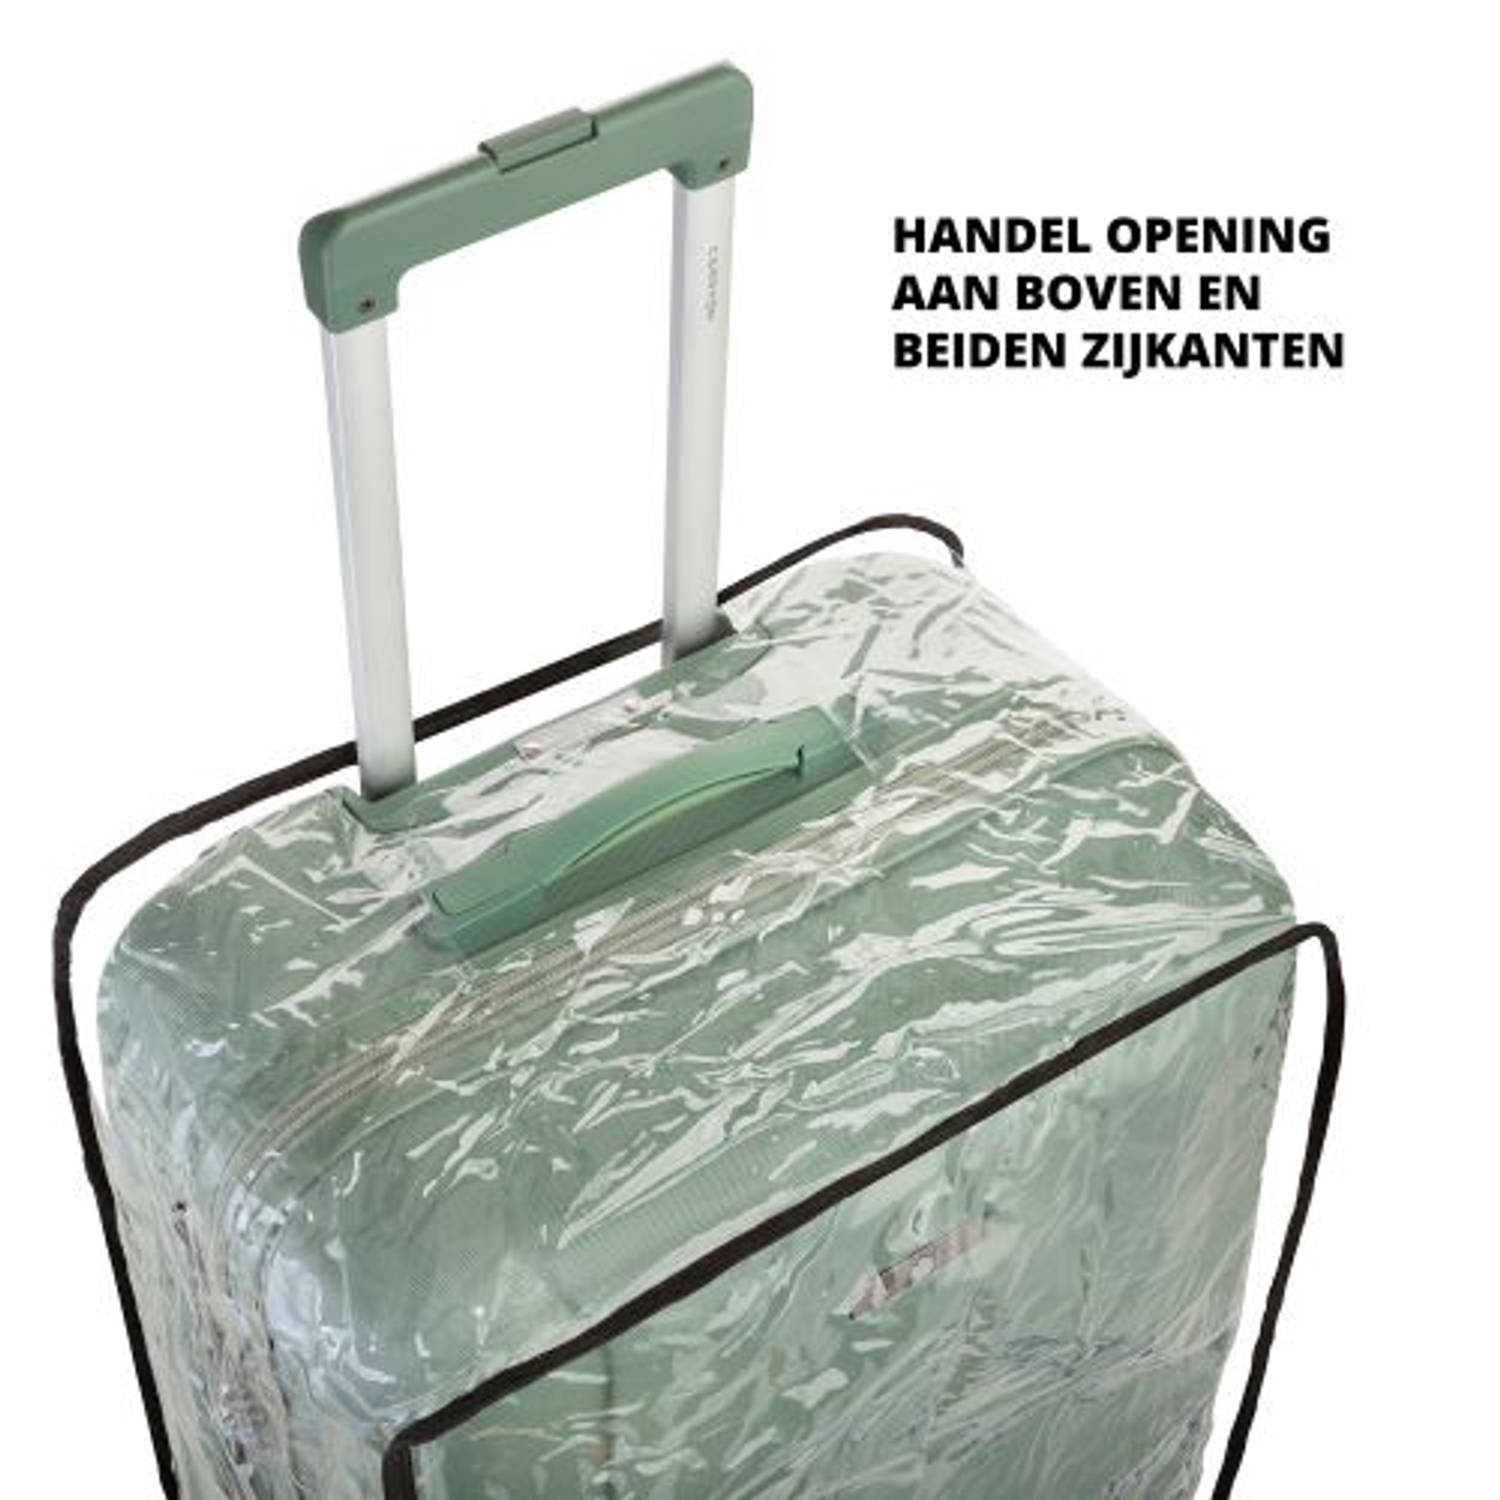 sneeuw Vleugels Vergissing CarryOn Kofferhoes - Beschermhoes koffer - Luggage Cover Large -  Transparant | Blokker